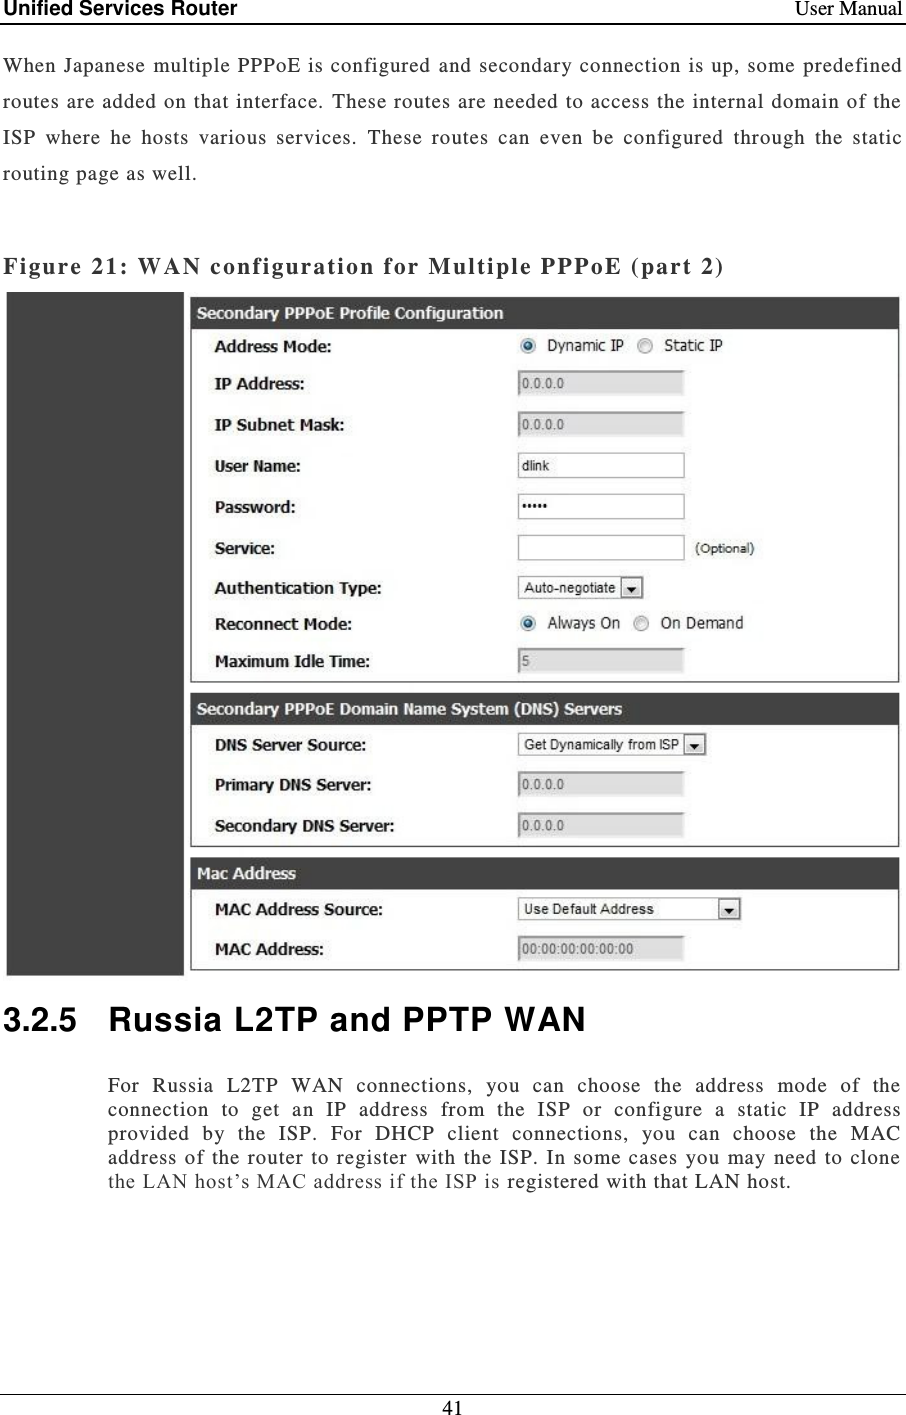 Unified Services Router    User Manual 41  When Japanese multiple PPPoE is configured and  secondary connection is up, some  predefined routes are added on that interface.  These routes are needed to access the internal domain of the ISP  where  he  hosts  various  services.  These  routes  can  even  be  configured  through  the  static routing page as well.  Figure 21: WAN conf iguration for Multiple PPPoE ( part 2)   3.2.5  Russia L2TP and PPTP WAN For  Russia  L2TP  WAN  connections,  you  can  choose  the  address  mode  of  the connection  to  get  an  IP  address  from  the  ISP  or  configure  a  static  IP  address provided  by  the  ISP.  For  DHCP  client  connections,  you  can  choose  the  MAC address of  the  router  to register  with  the  ISP.  In some  cases  you may need  to clone the LAN host’s MAC address if the ISP is registered with that LAN host.   